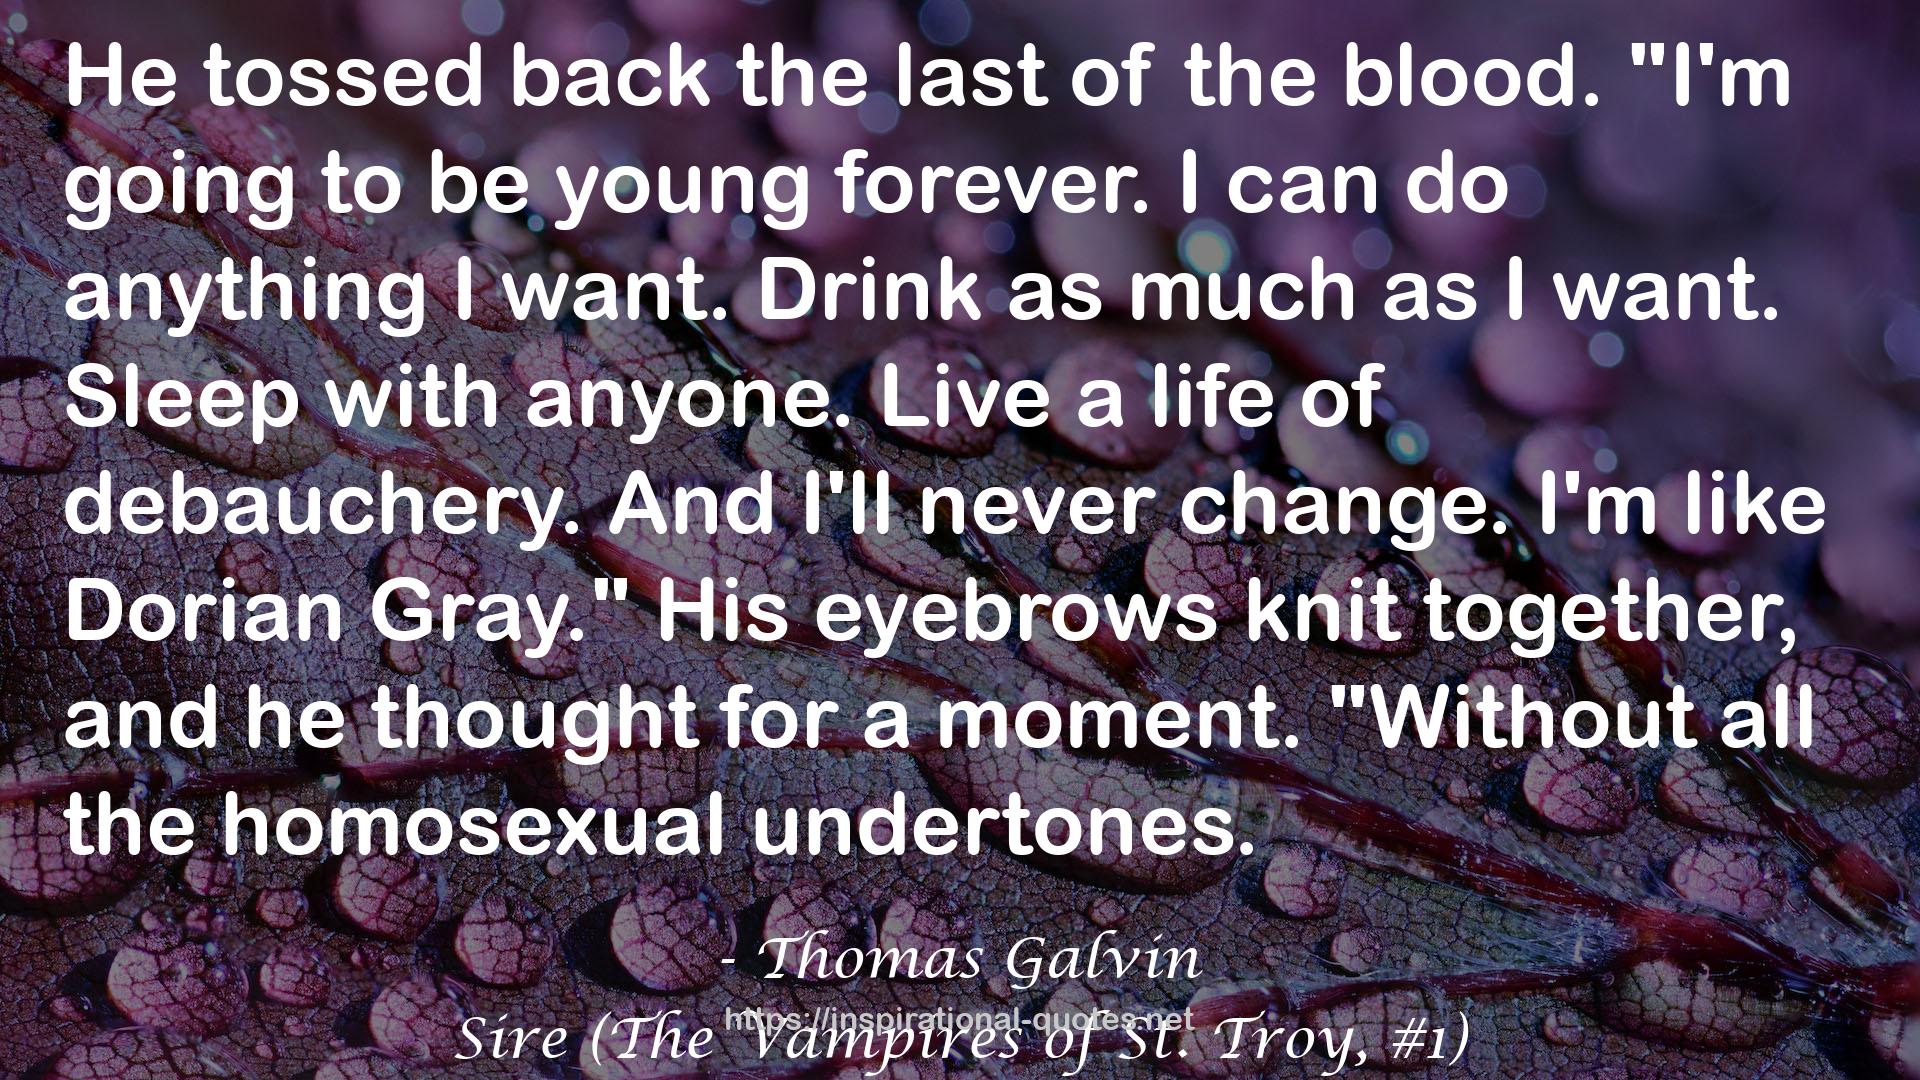 Sire (The Vampires of St. Troy, #1) QUOTES